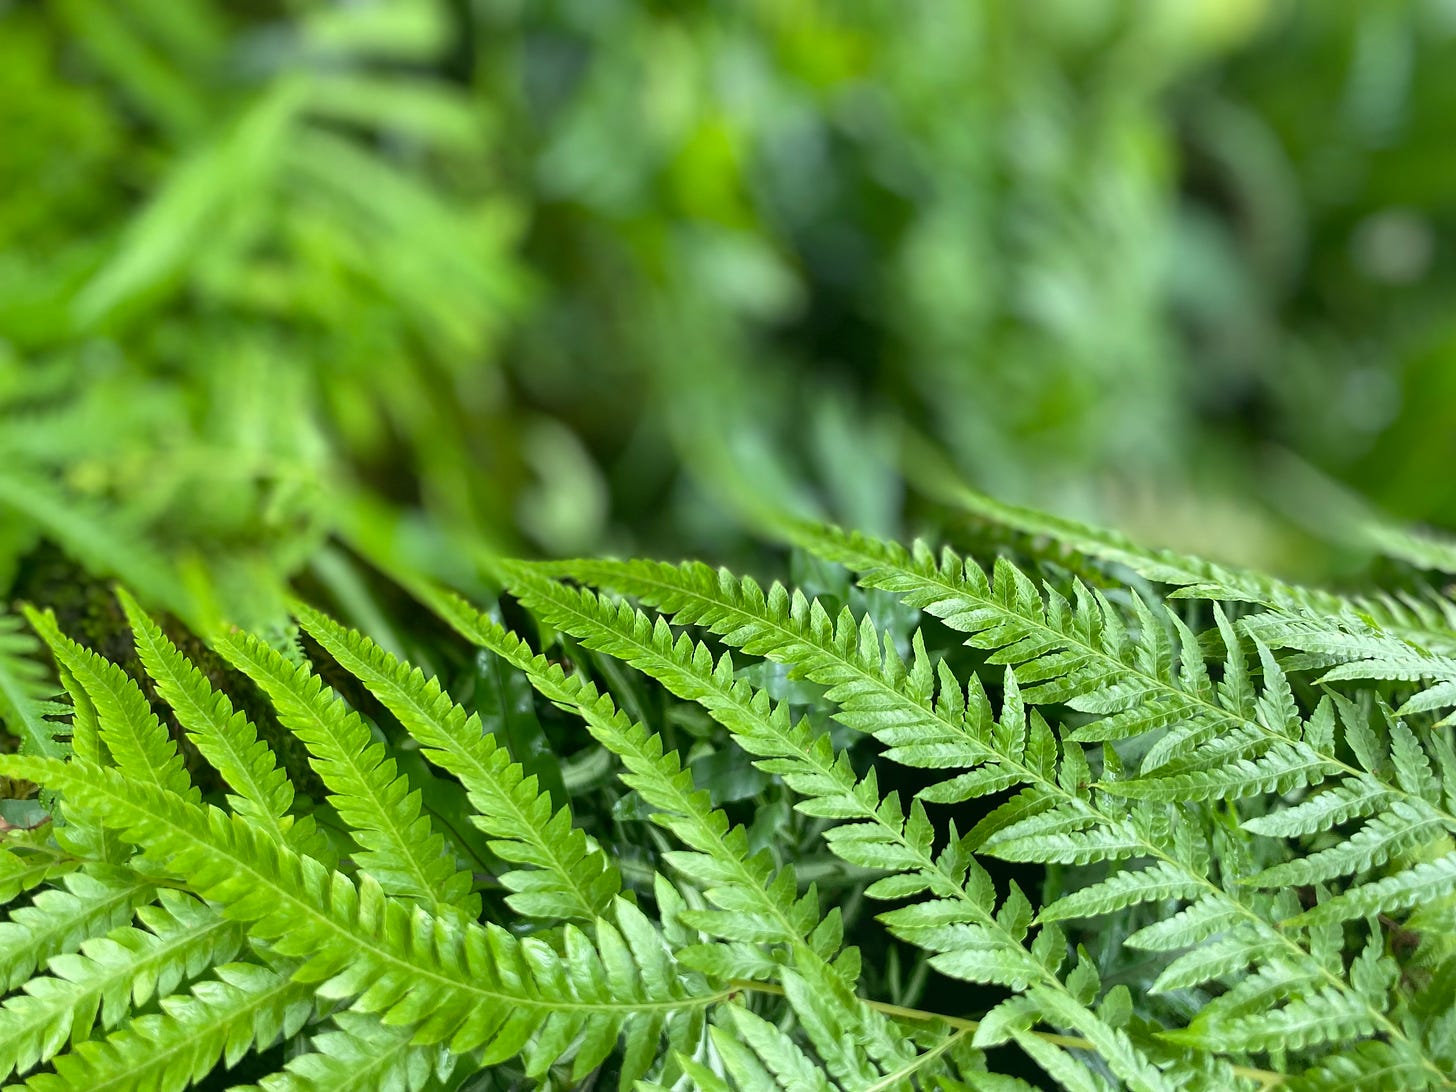 A fern lines the bottom of the photo with its fronds angled toward the left. The rest of the photo is blurred green with ferns in the backdrop.